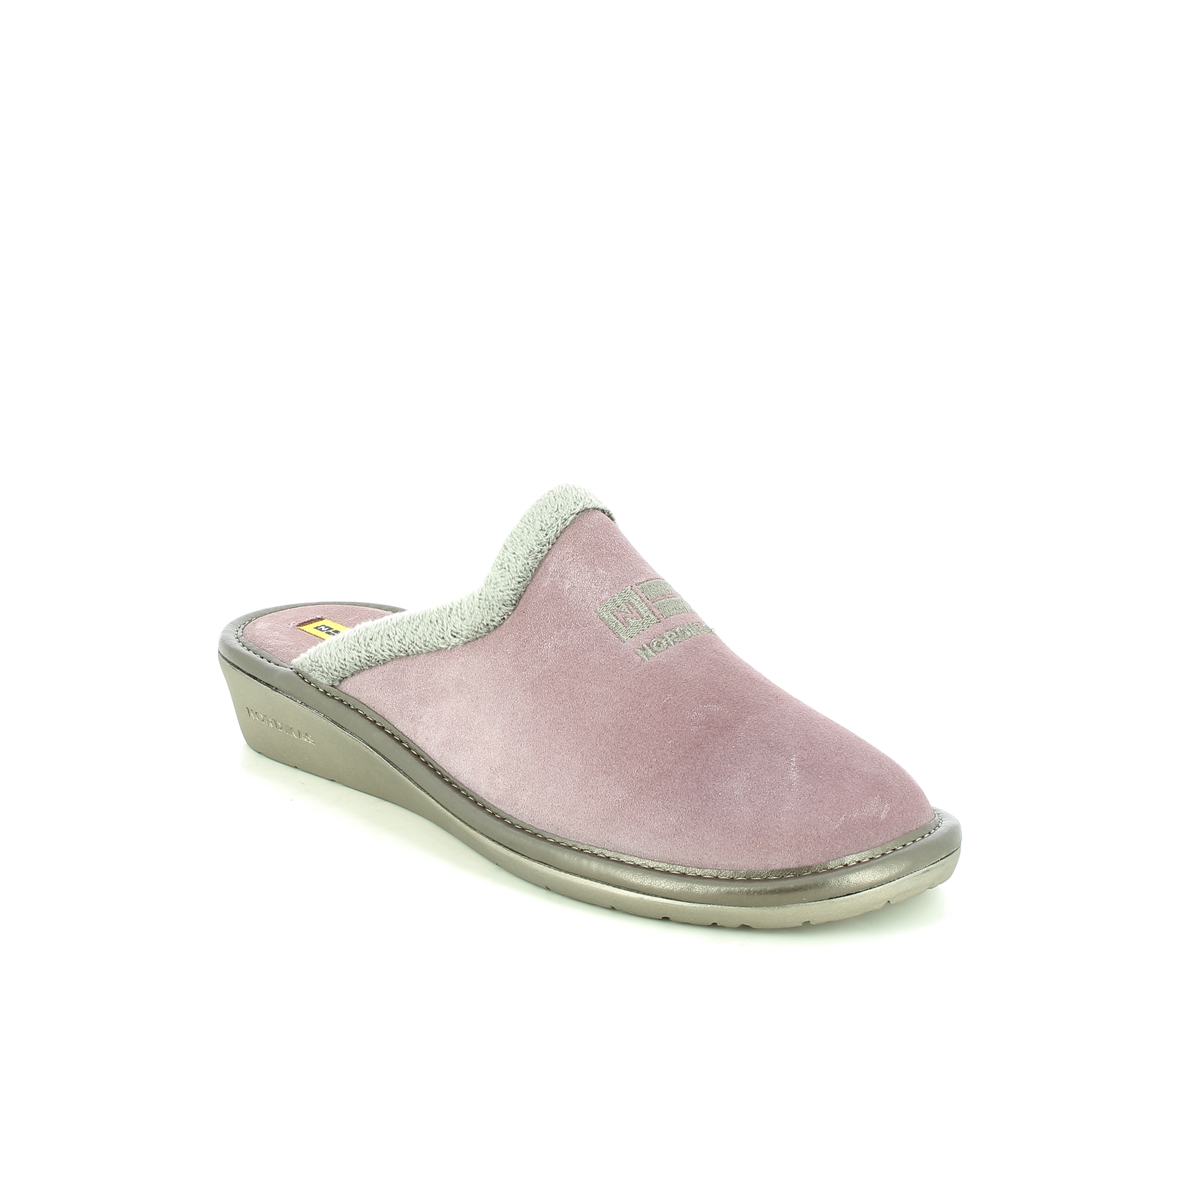 Nordikas Musue Pink Suede Womens Slipper Mules 238O-8   Natala 3 In Size 39 In Plain Pink Suede